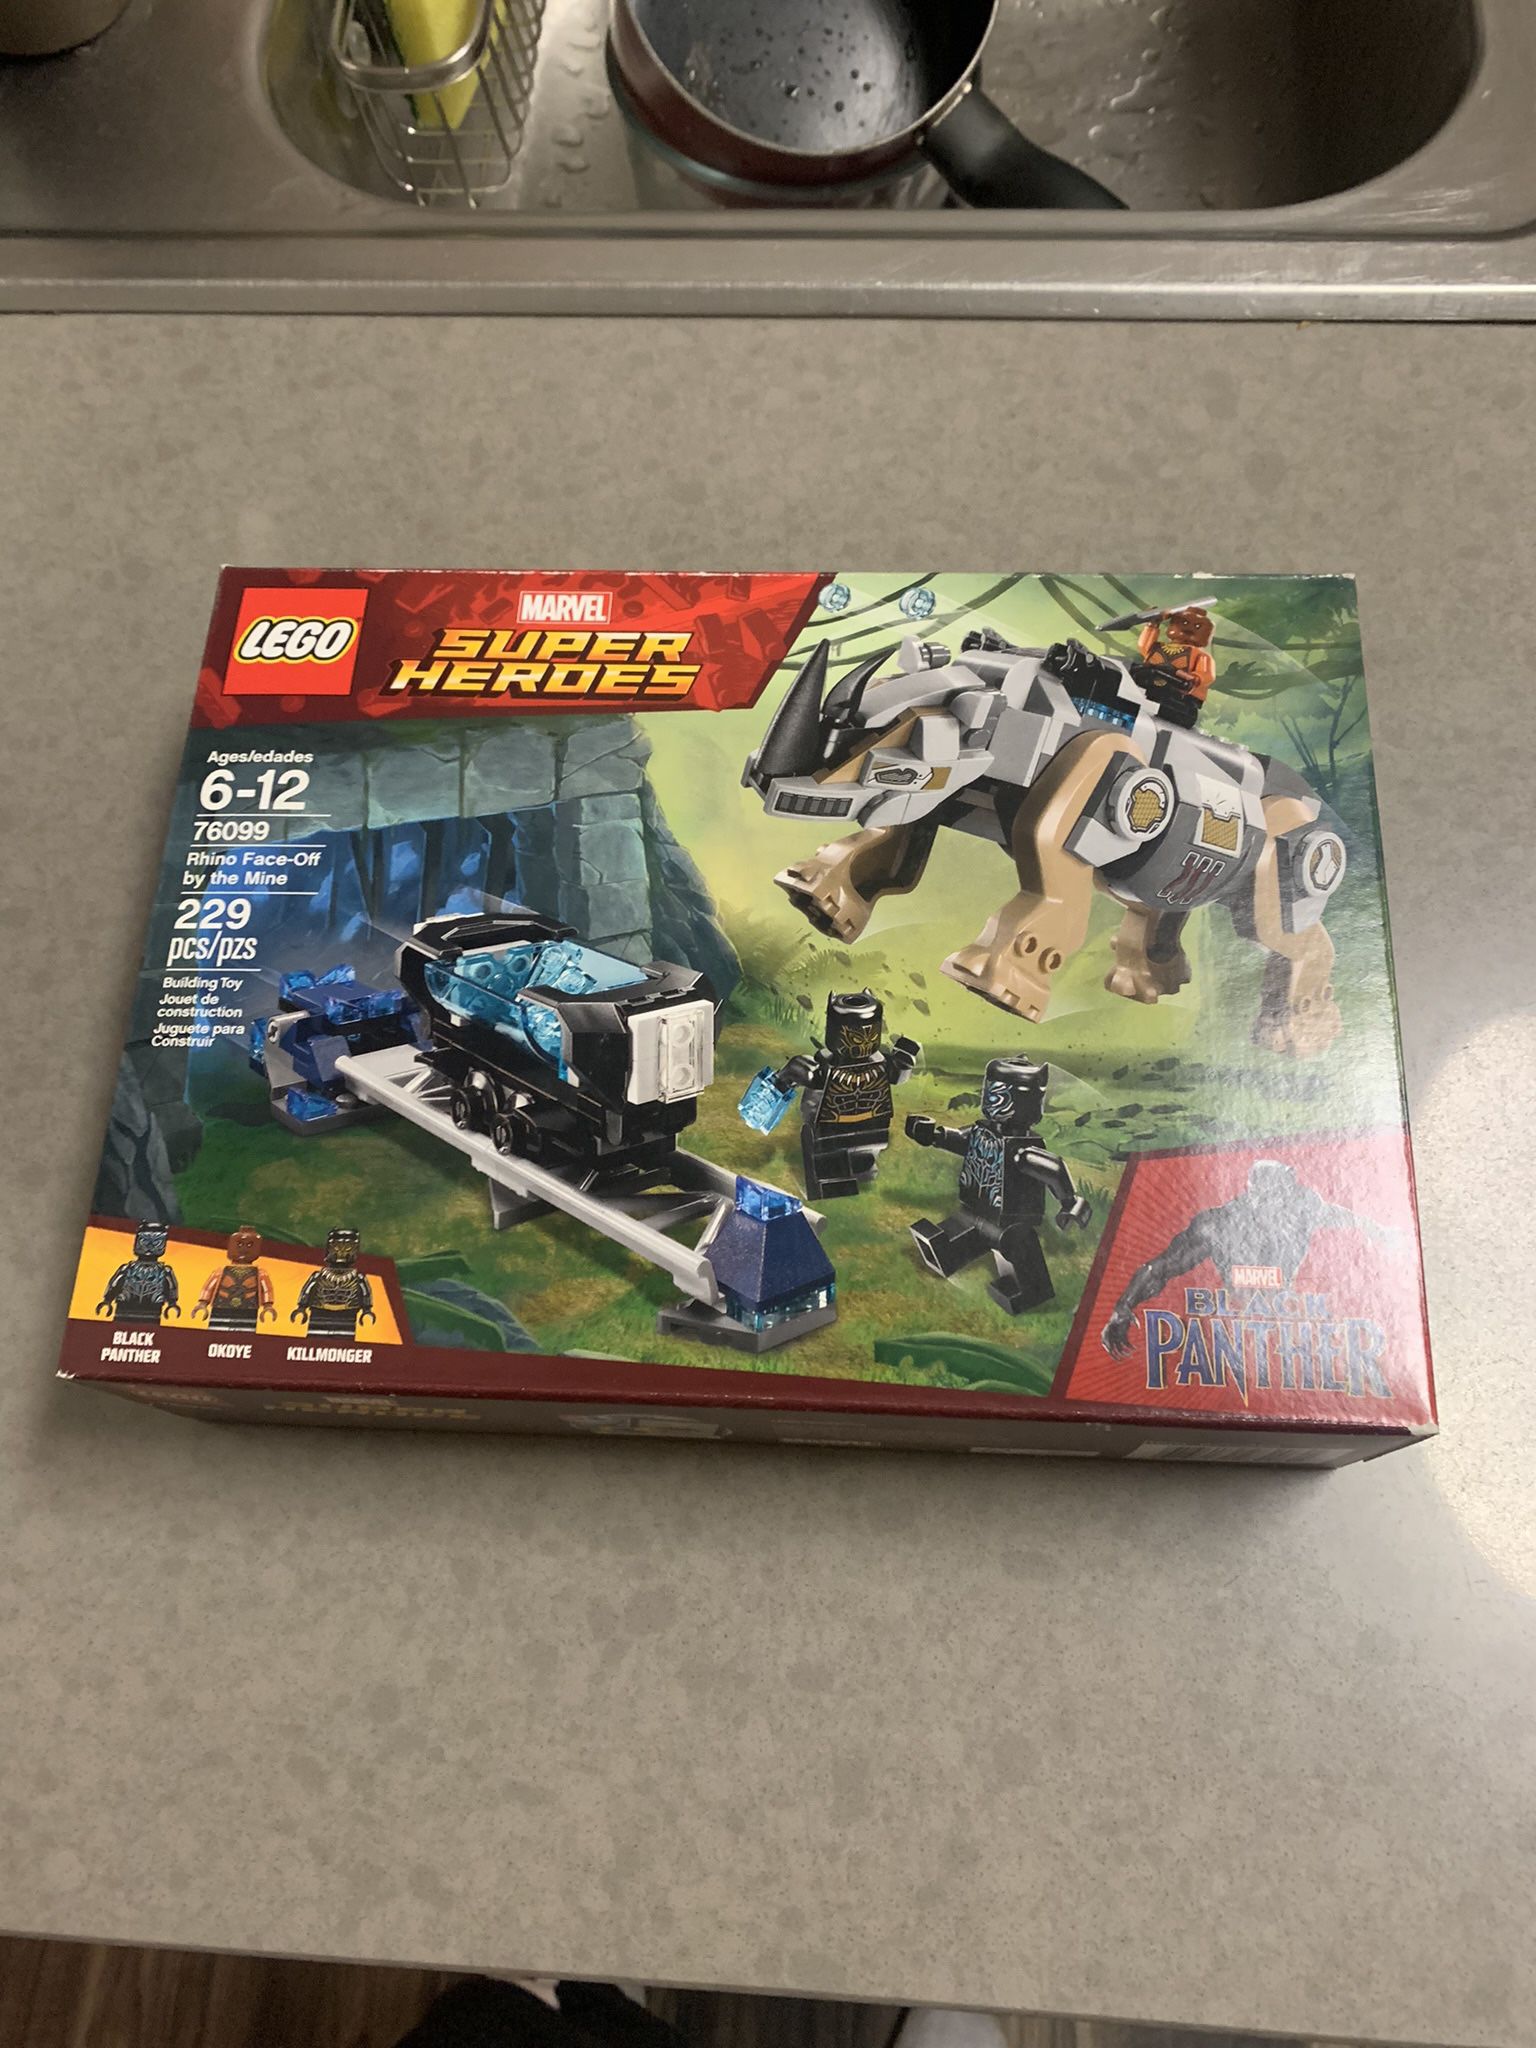 Lego Marvel Super Heroes Rhino Face-Off by the Mine #76099 New Sealed